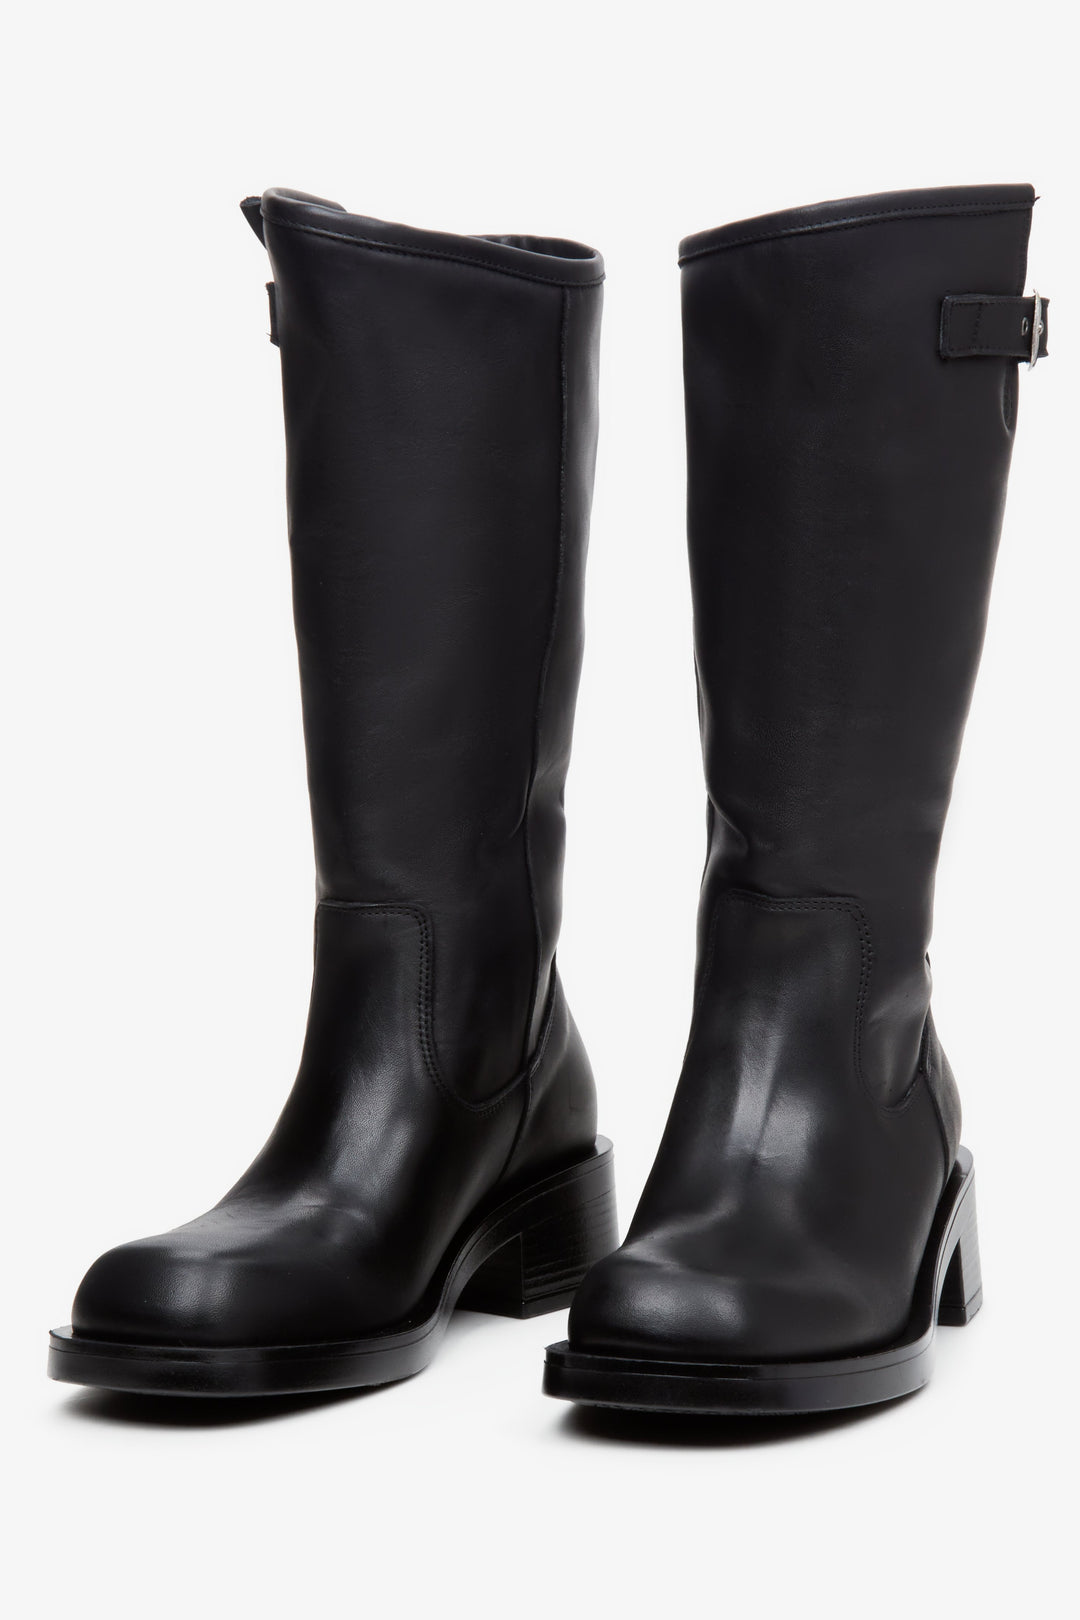 Women's black high boots by Estro - front view presentation of the model.